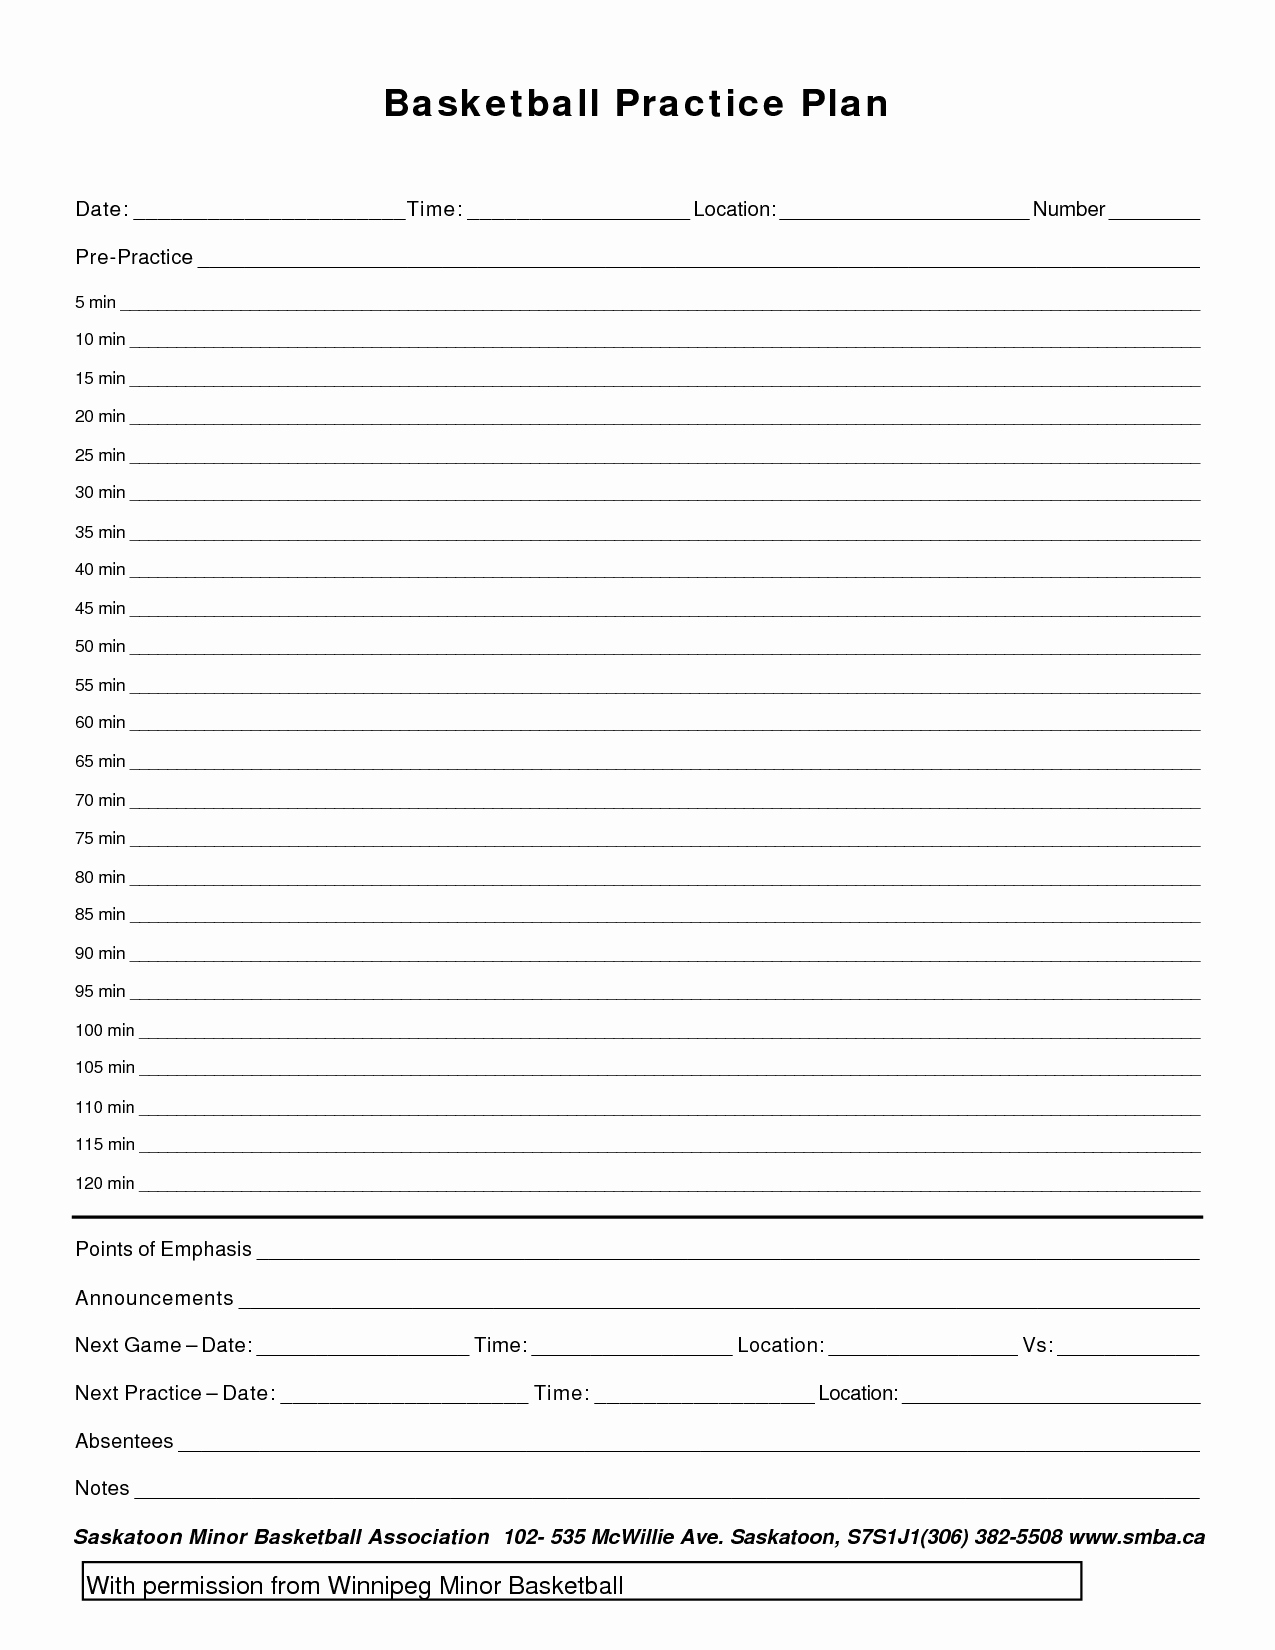 Football Practice Plan Template Lovely Basketball Practice Plan Template